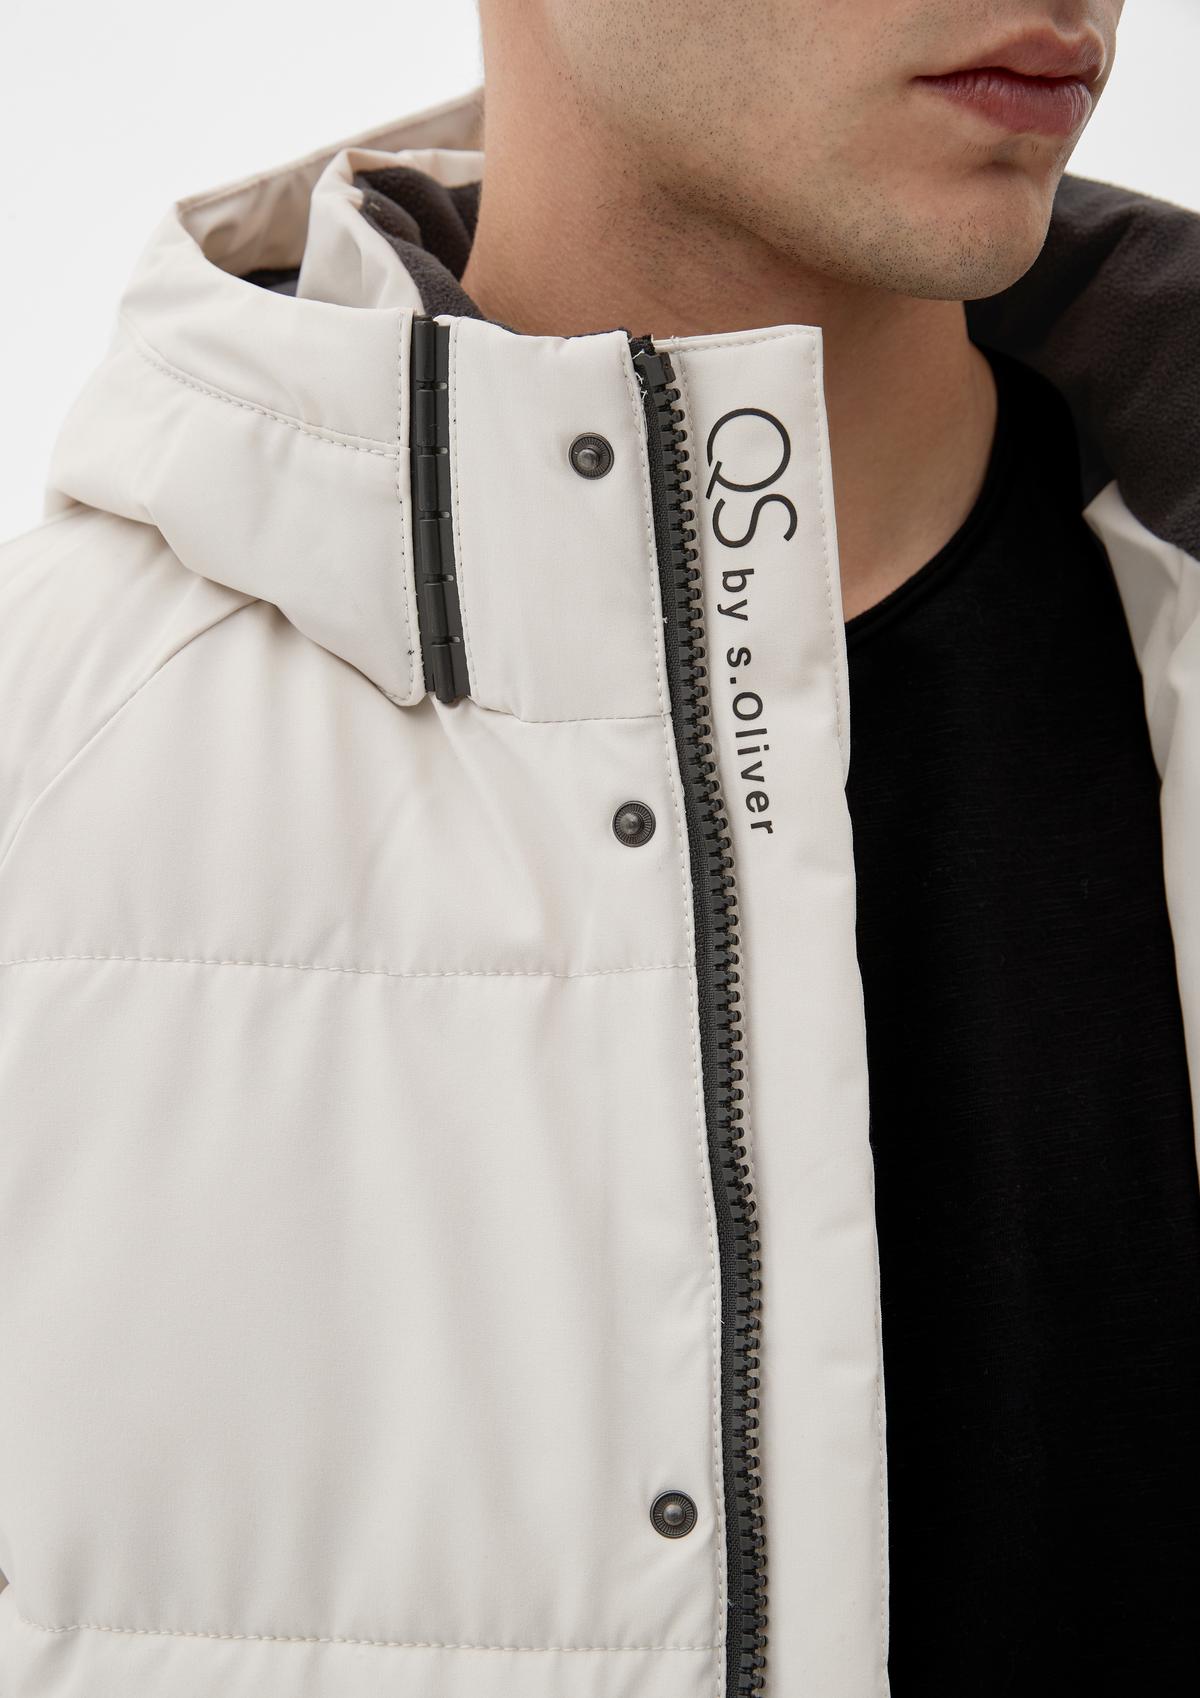 s.Oliver Jacket with a detachable hood